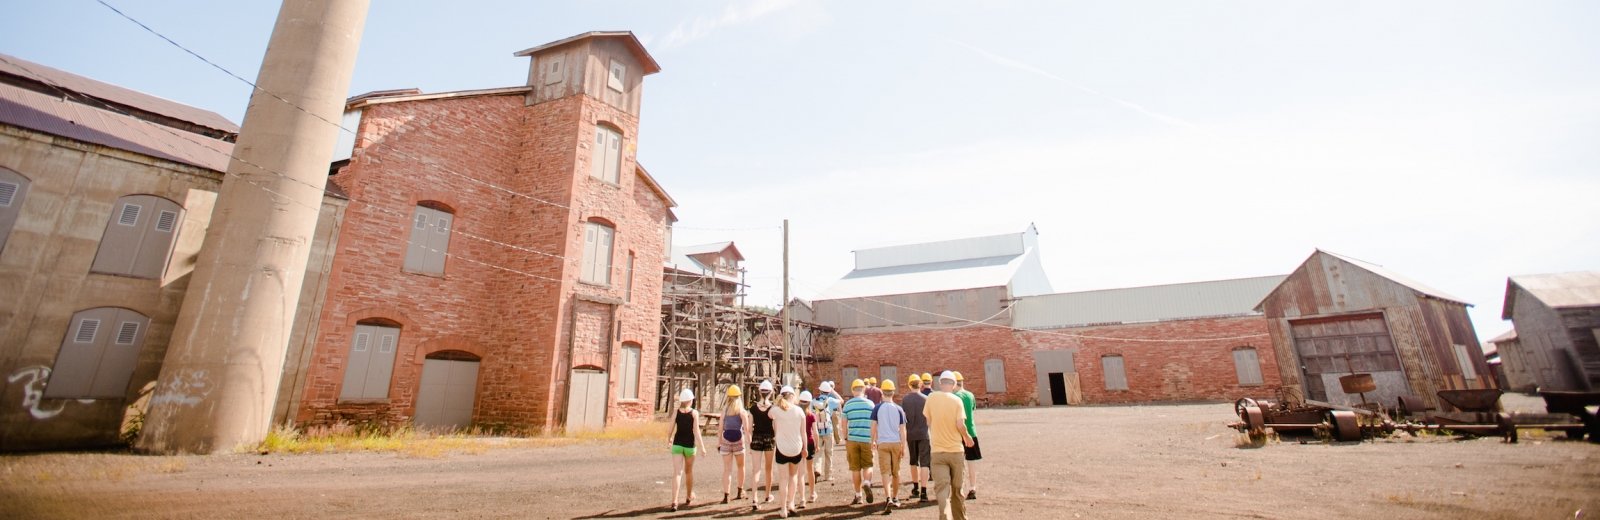 Quincy Smelter with a group walking in